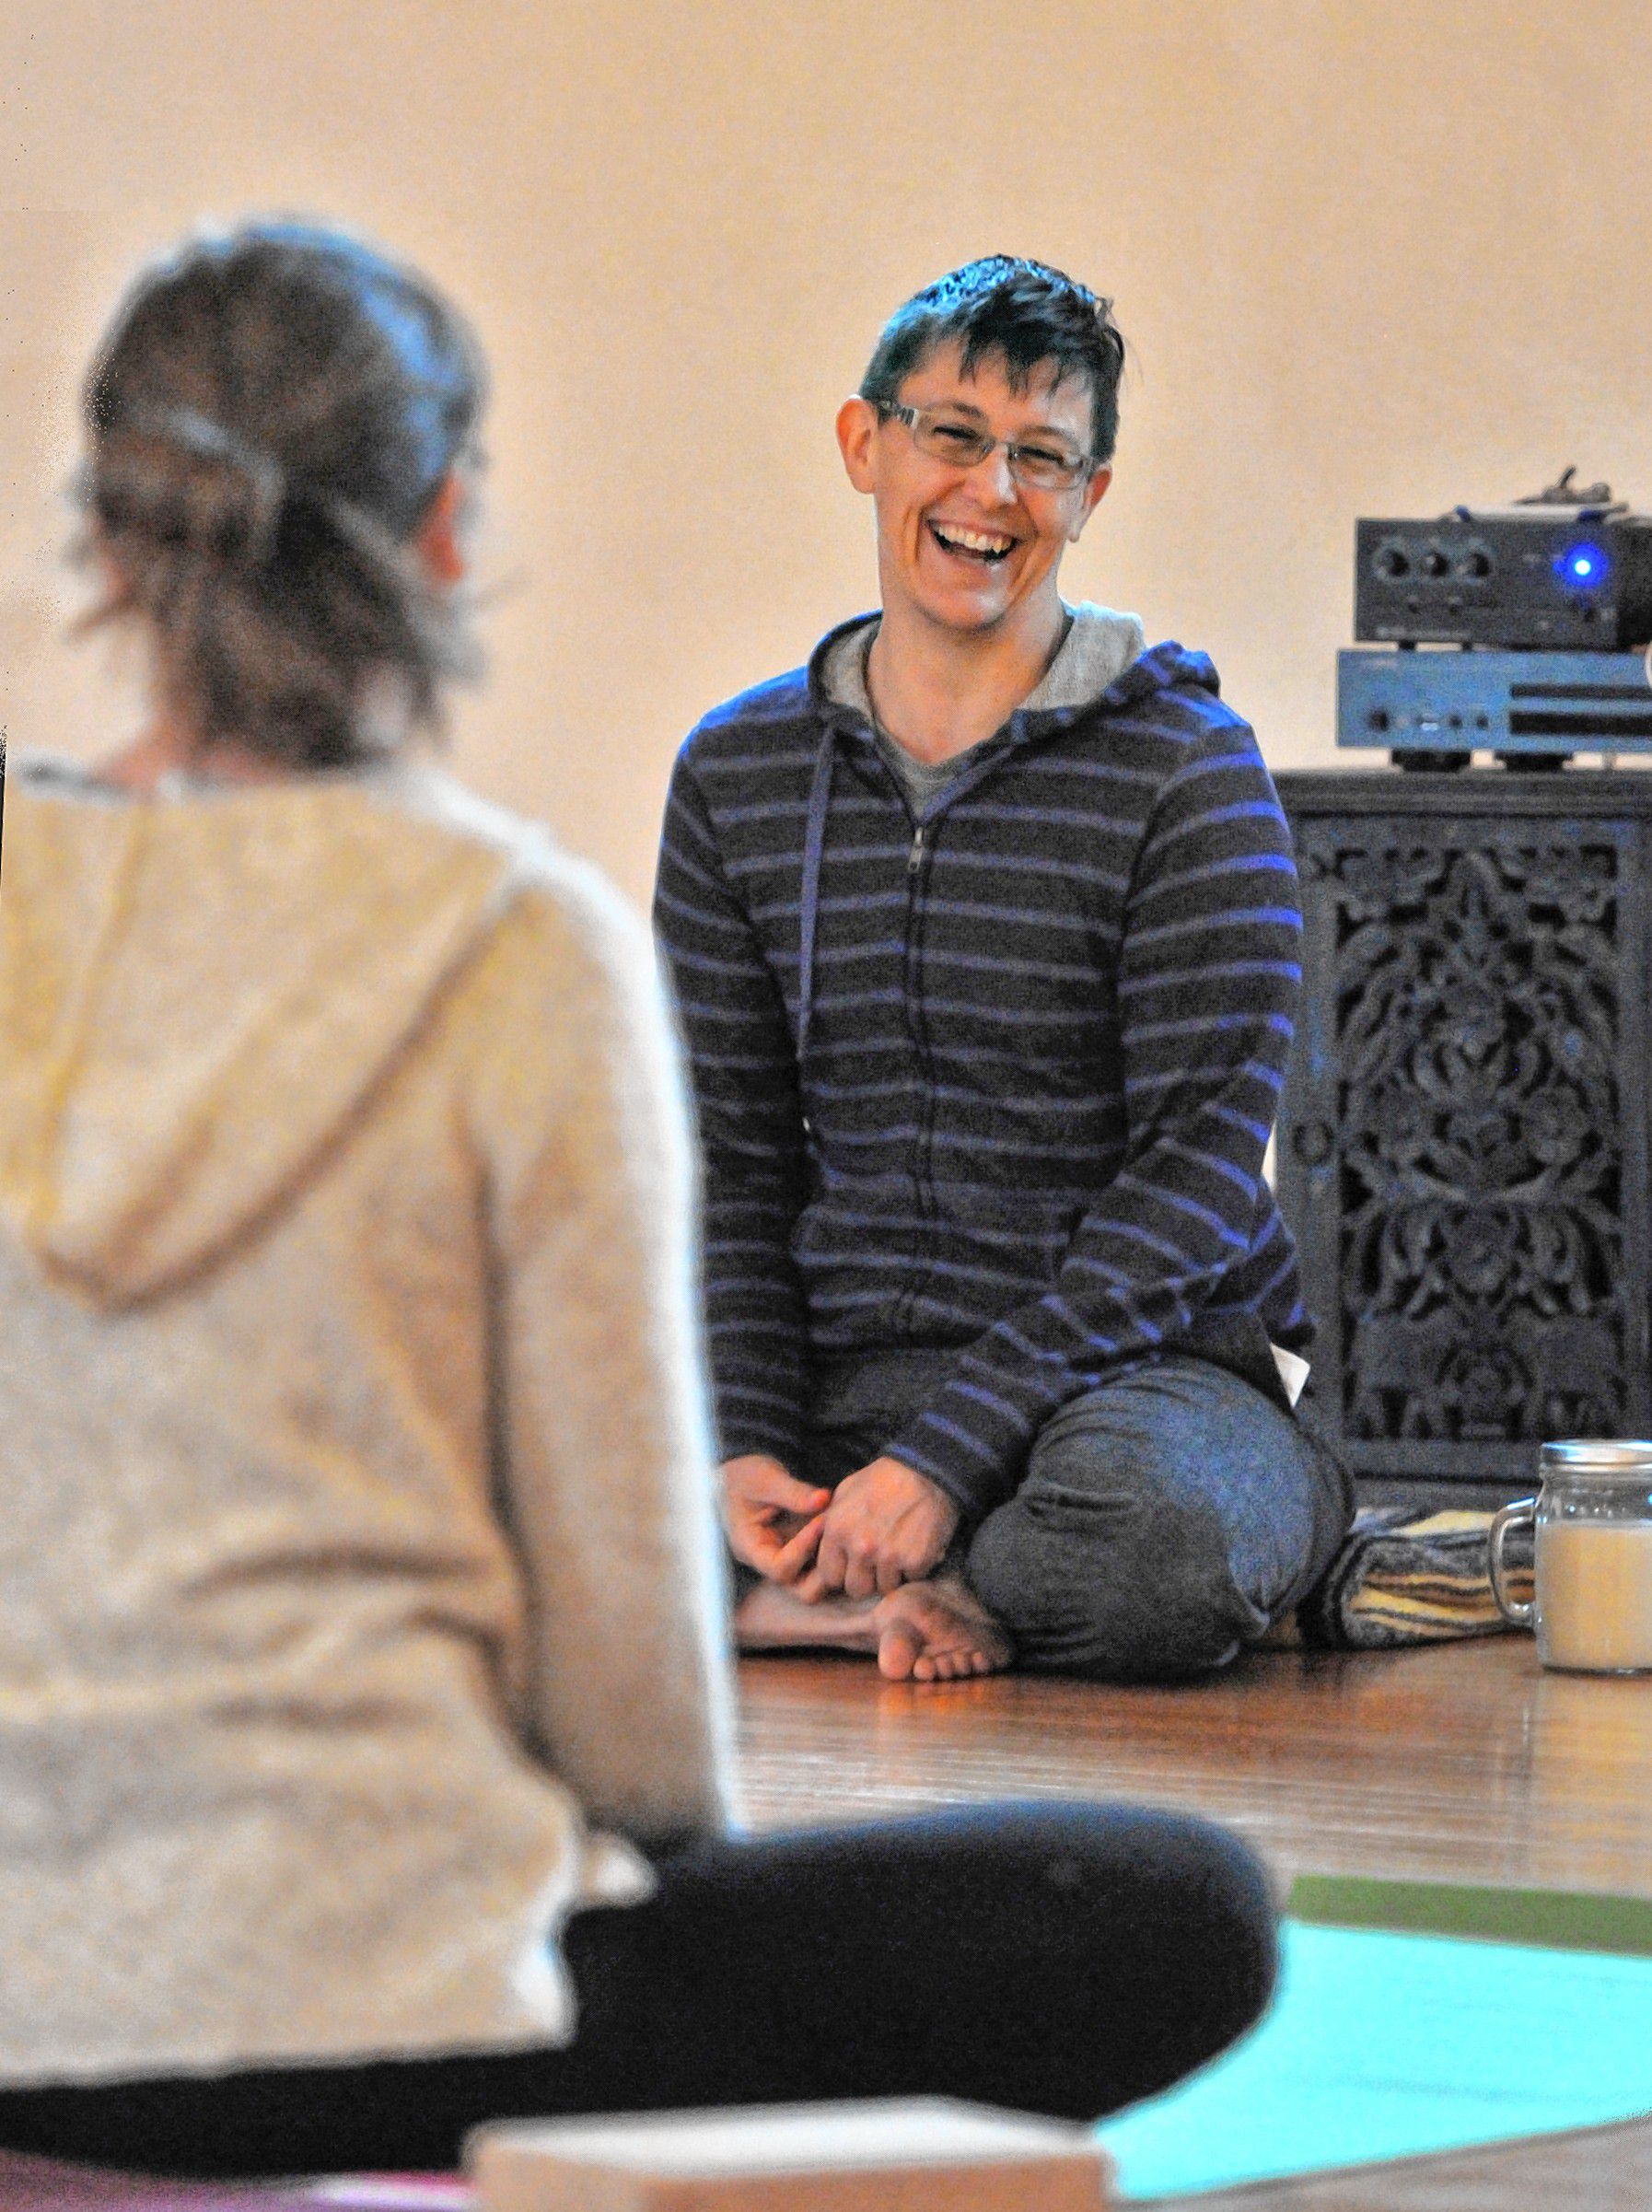 Third Eye Roaming: Amherst yoga leader aims to move minds